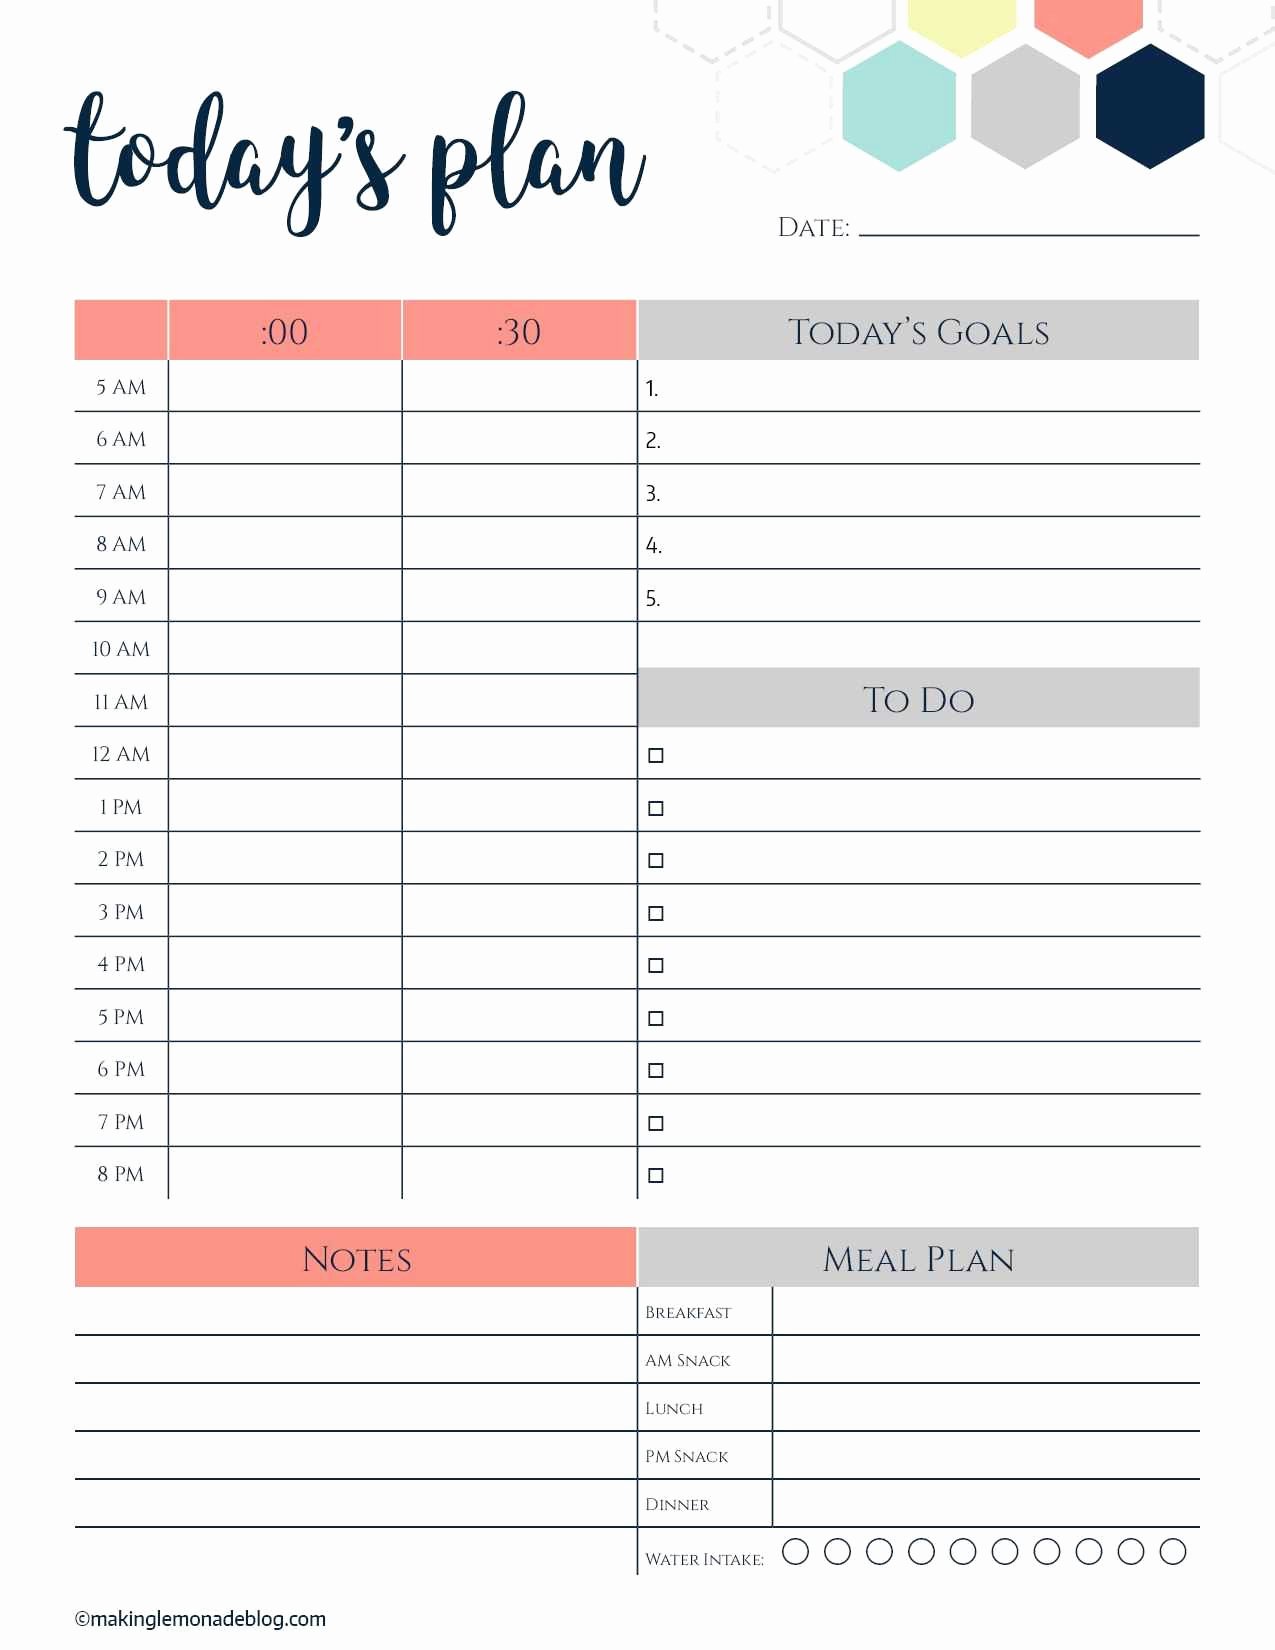 Construction Project Schedule Template Excel Awesome Construction Project Schedule Template Excel Free with